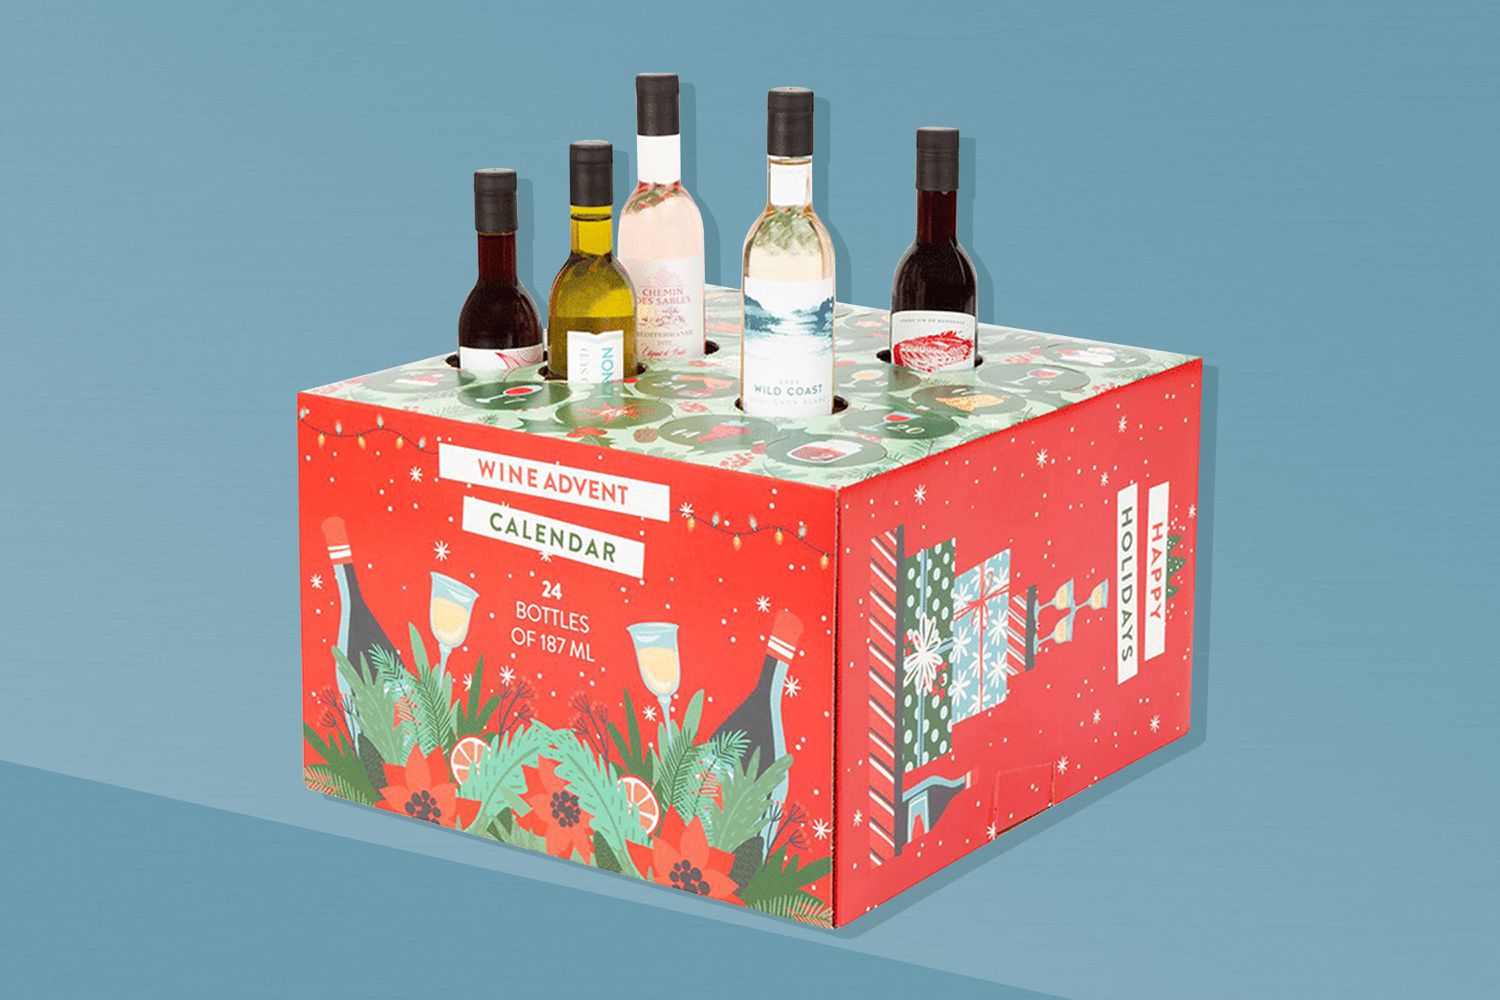 The Most Wonderful Wine collection is a wine advent calendar that we're eyeing. It comes with 24 distinct 187 milliliter bottles that have been hand-picked by specialists. Even if you aren't sure of the recipient's taste, you may still find something they'll enjoy in the box of white, red, and rosé grapes from across the world. 